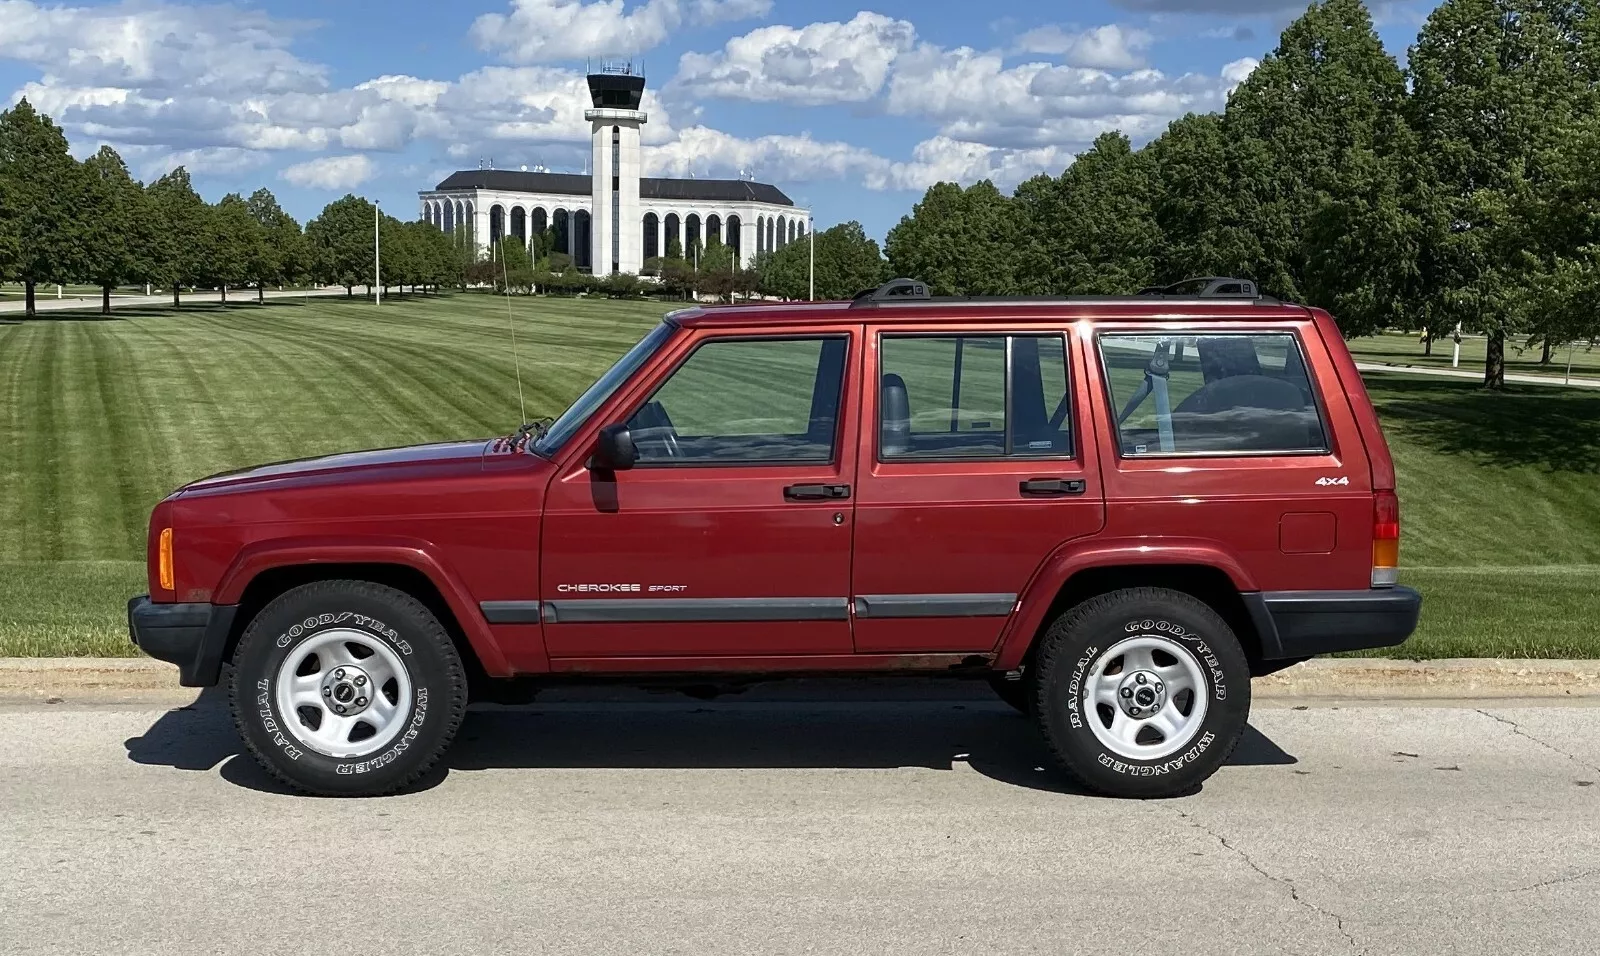 1999 Jeep Cherokee for sale